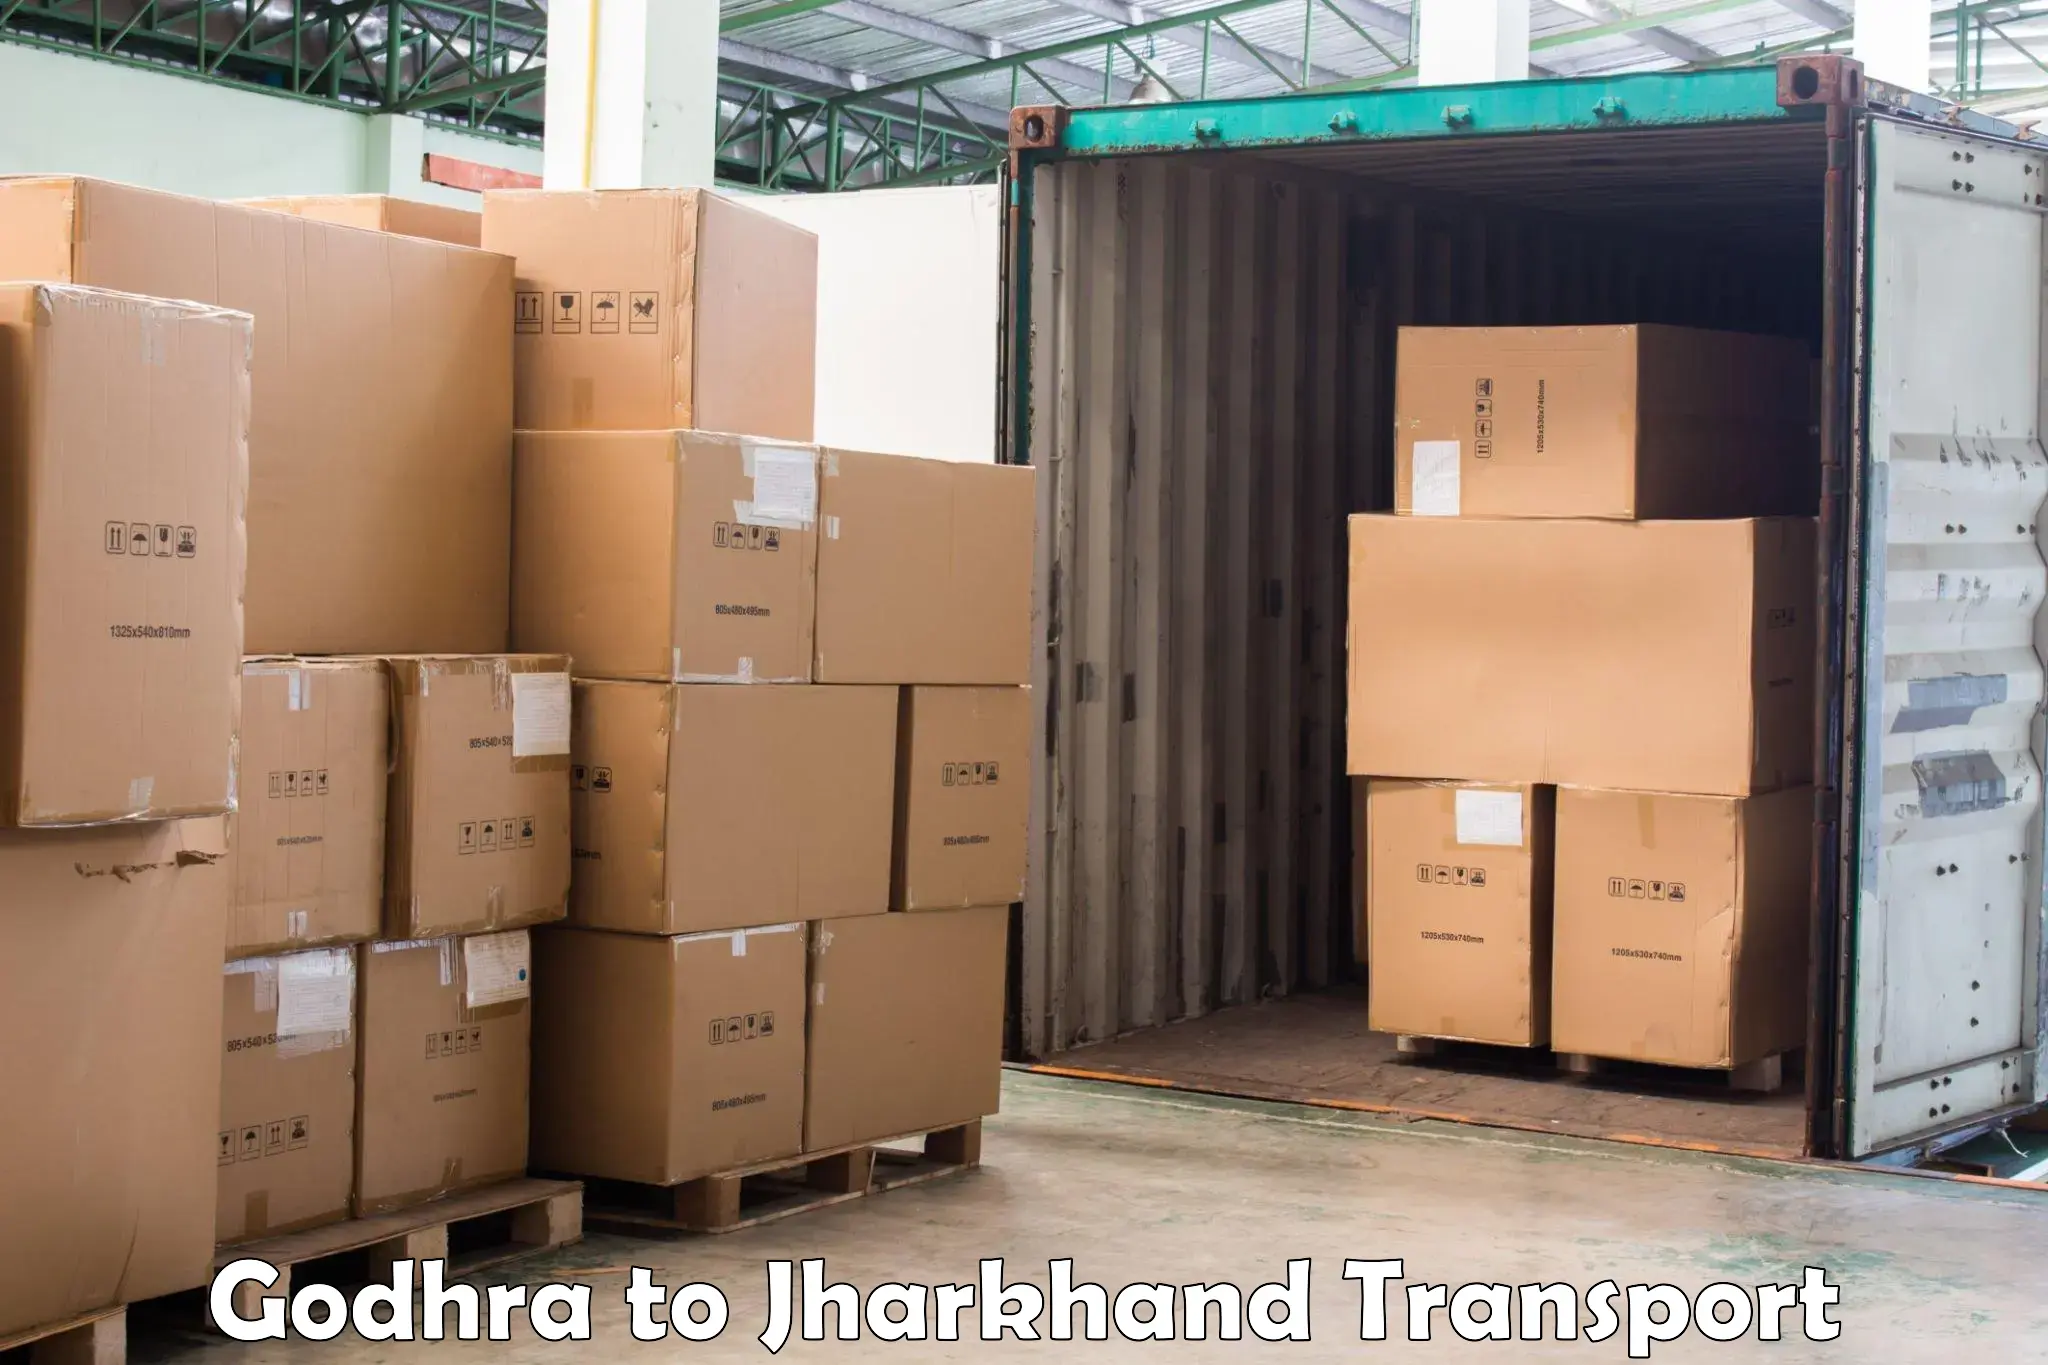 Truck transport companies in India in Godhra to Chaibasa